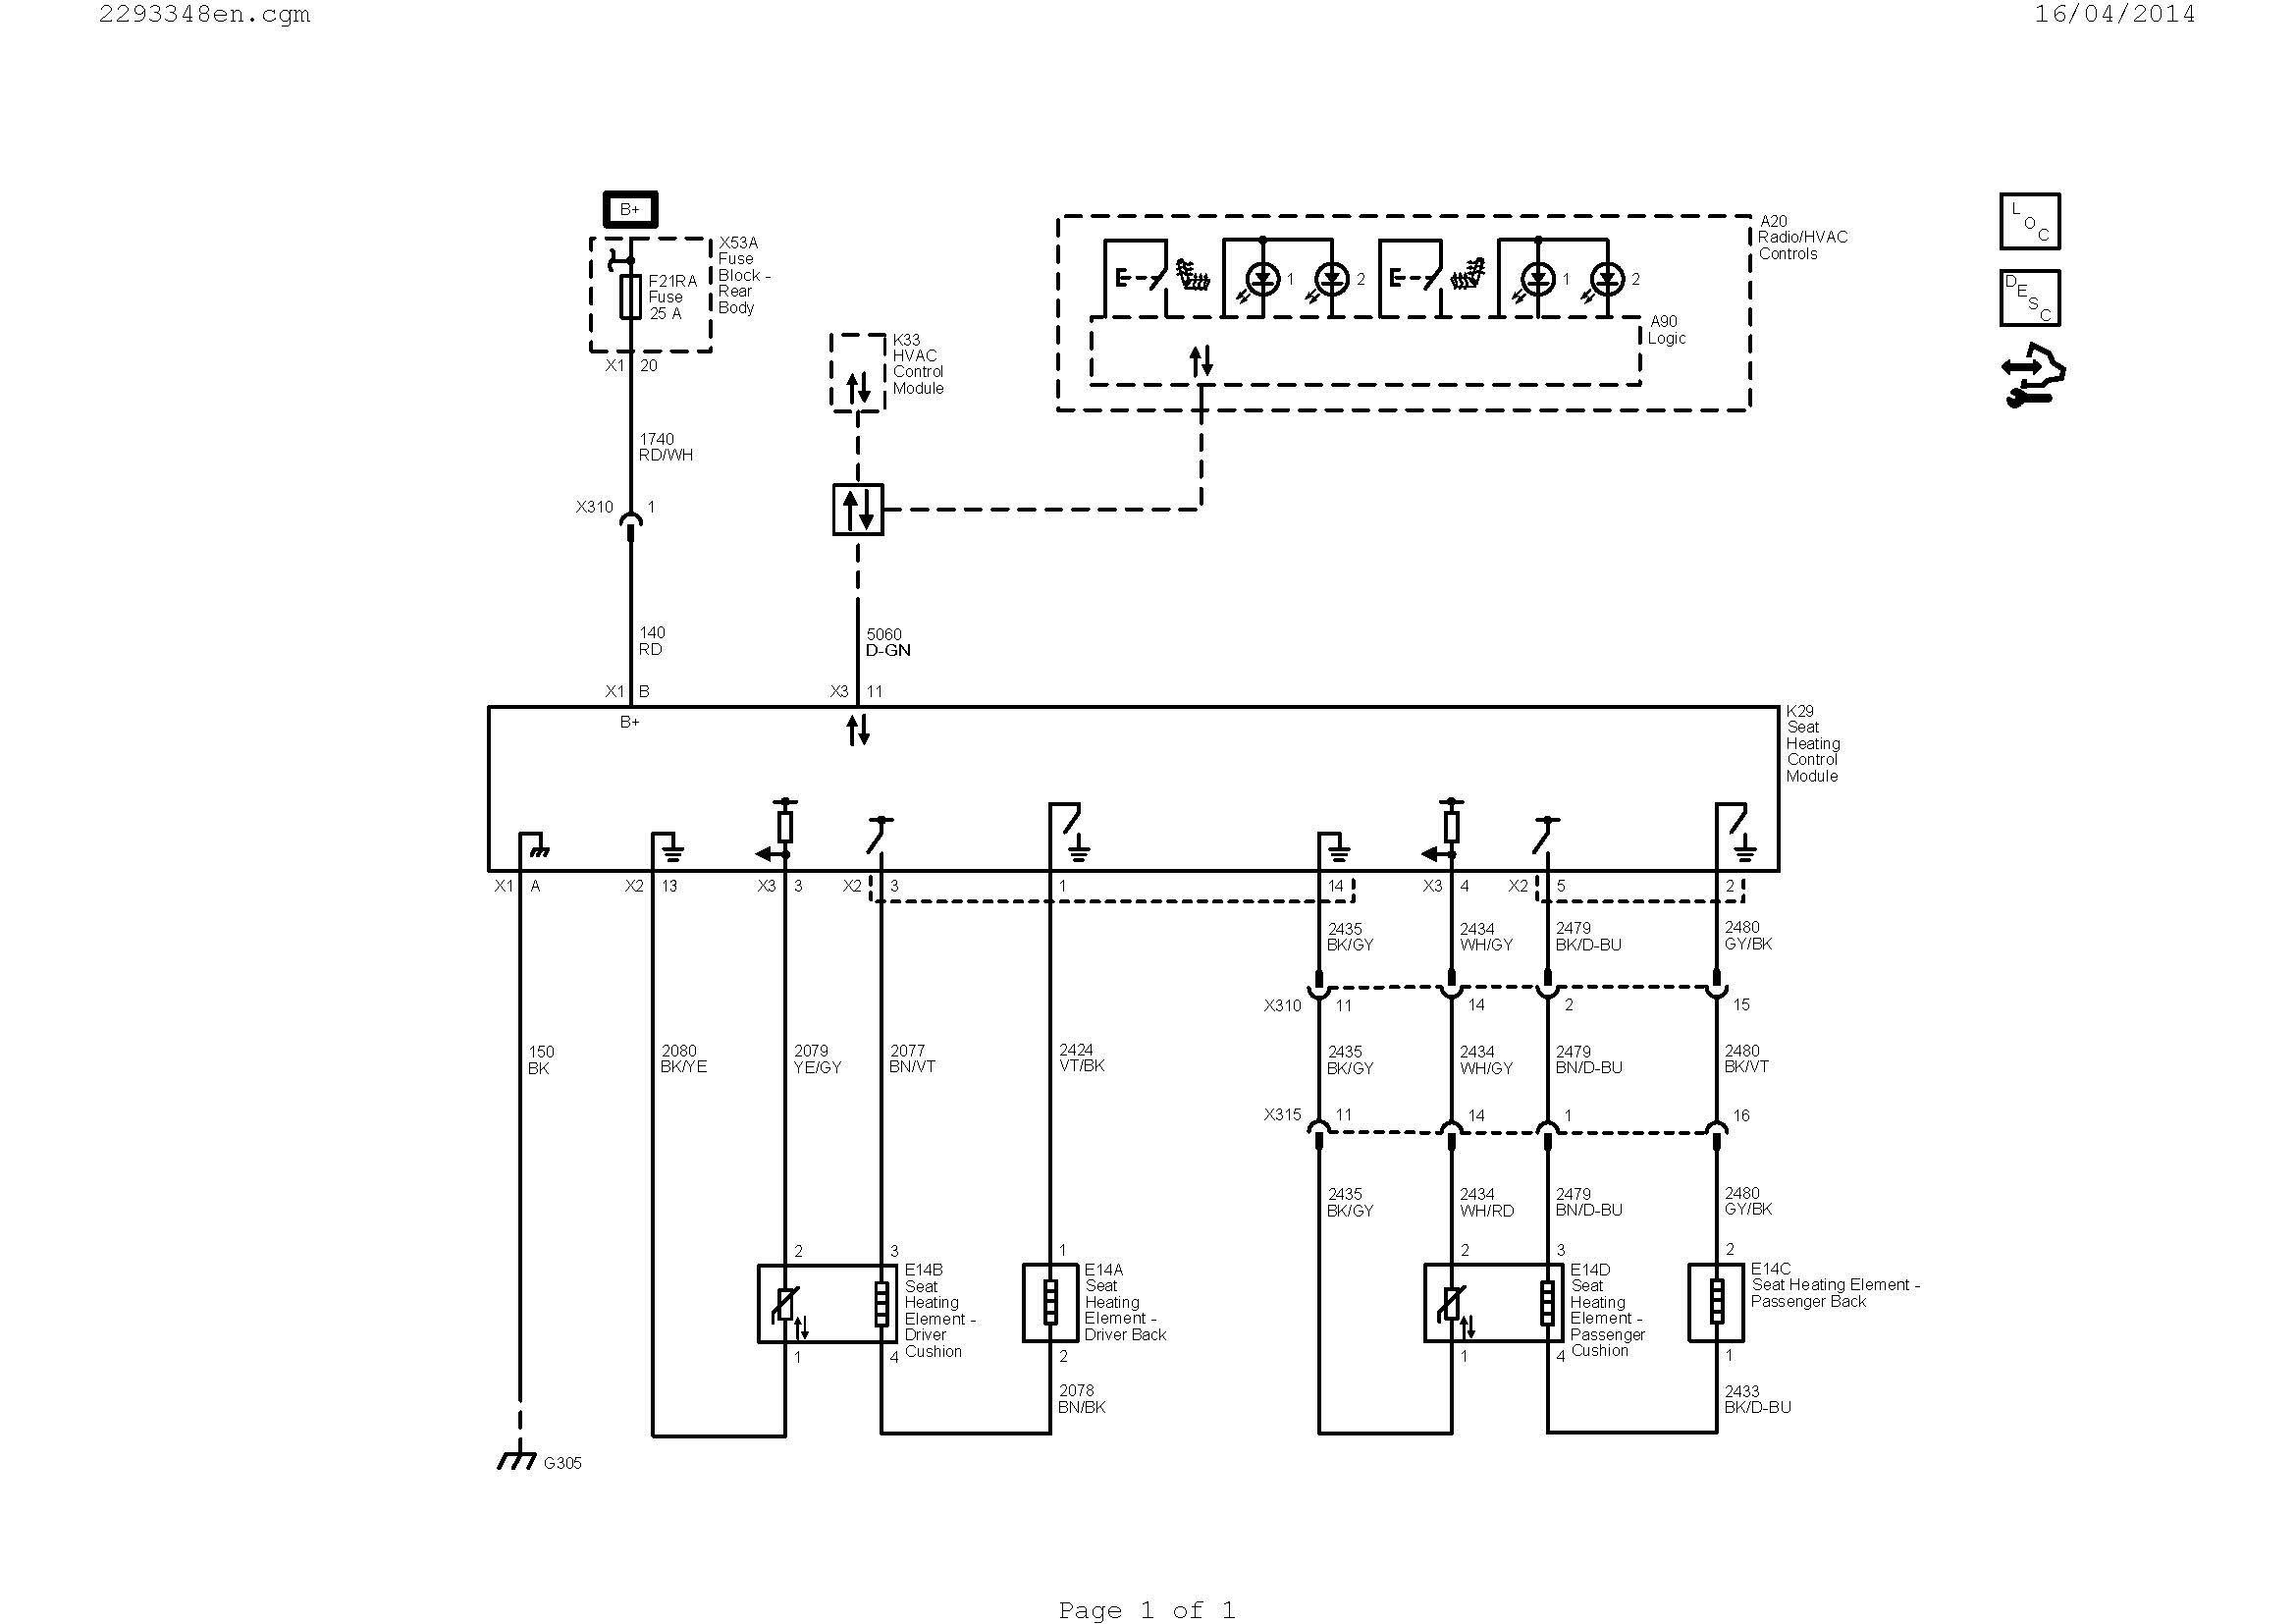 Single Phase Wire Diagram Best Hvac thermostat Wiring Diagram Collection